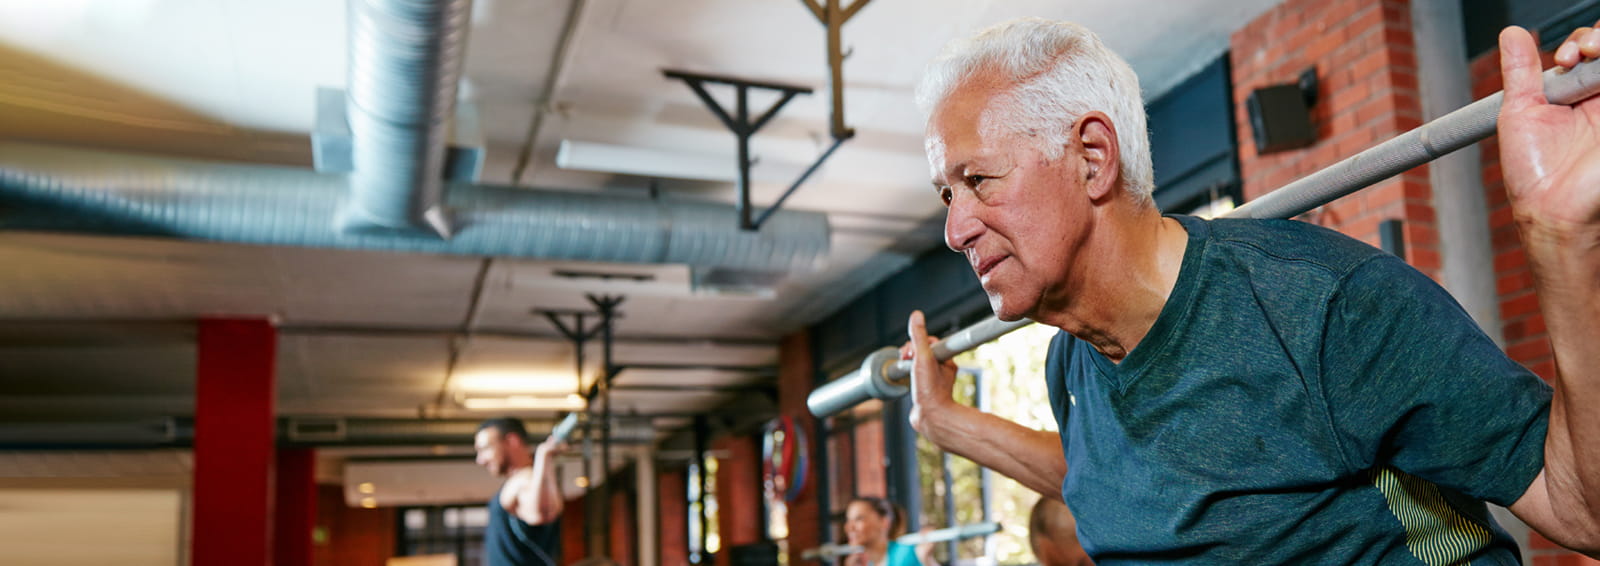 Man with prostate cancer working out at a gym